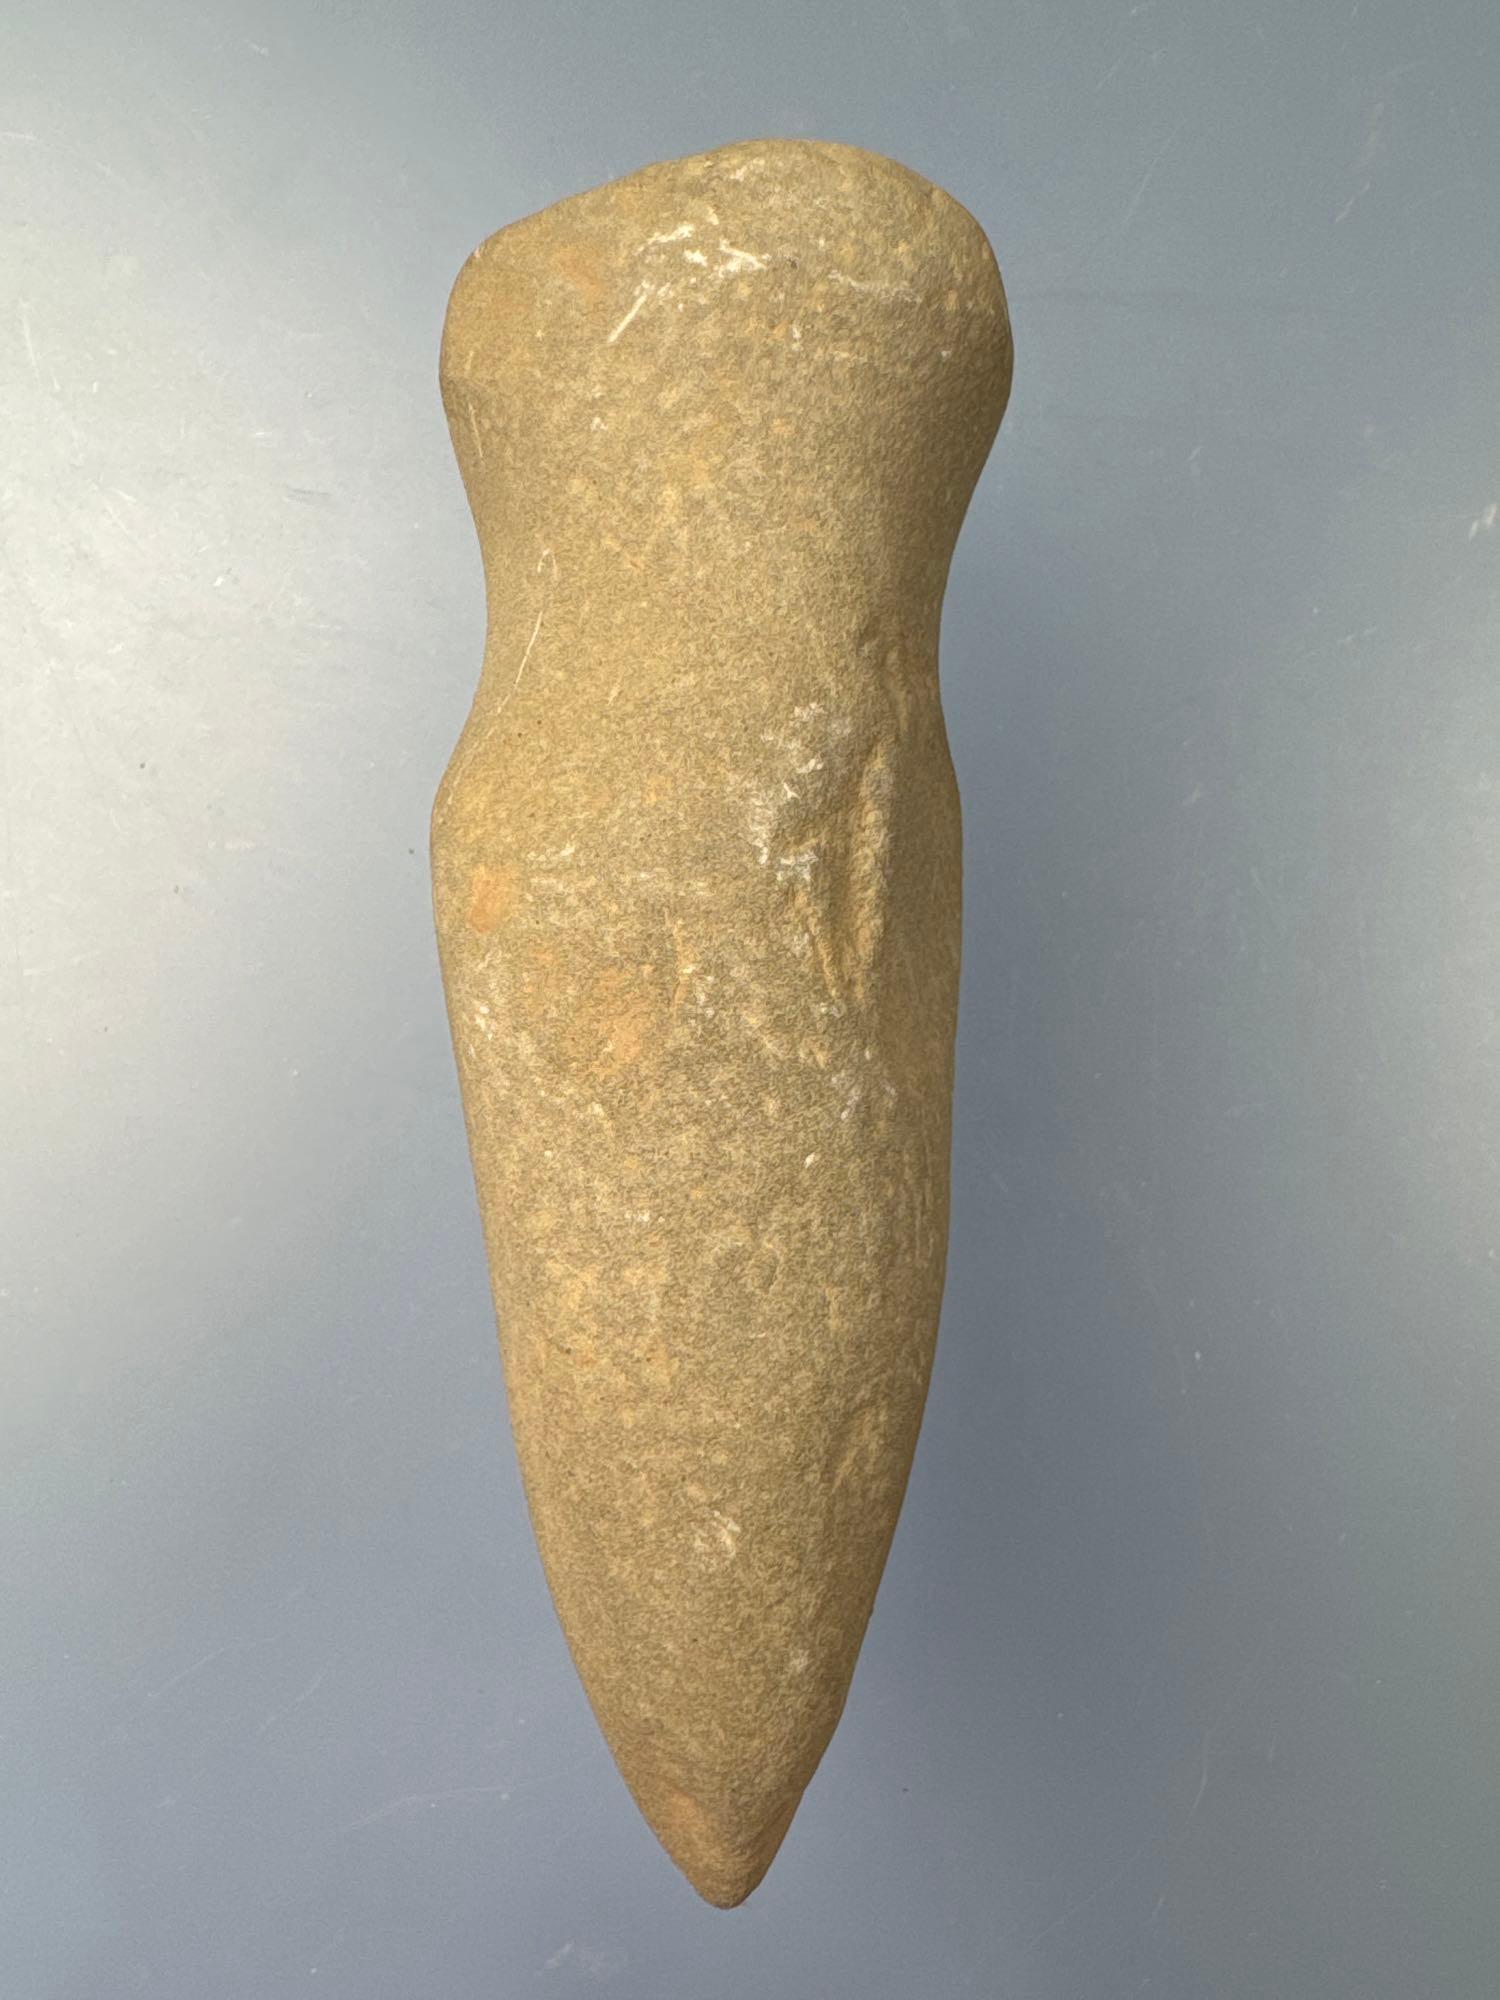 Quality 6 1/2" Sandstone 3/4 Grooved Axe, Found in Chester Co., PA, SITS ON END!, Ex: Cicero Collect